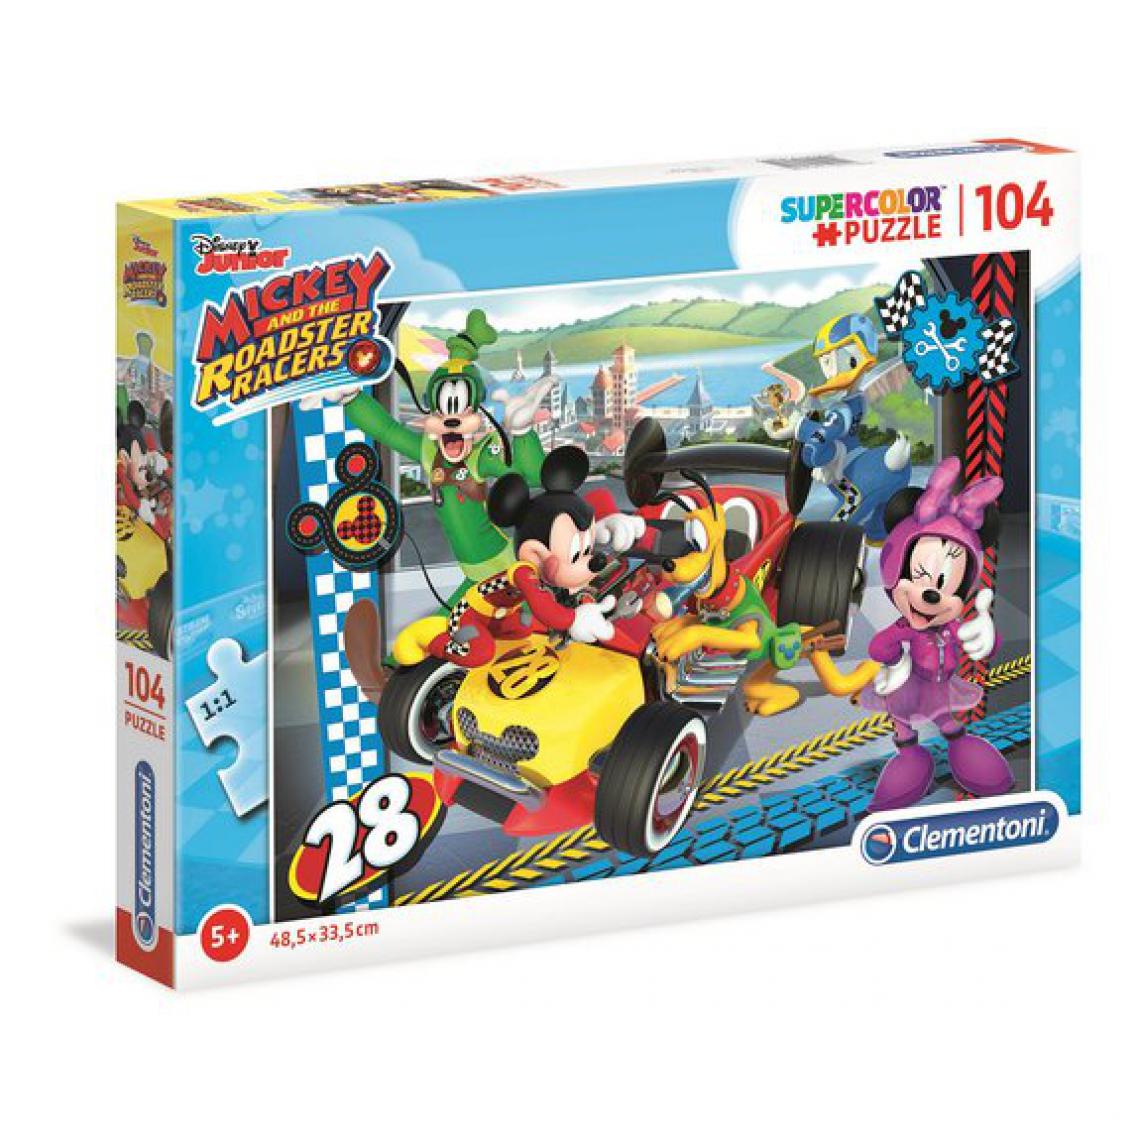 Ludendo - Puzzle SuperColor 104 pièces - Mickey and the Roadster racers - Animaux